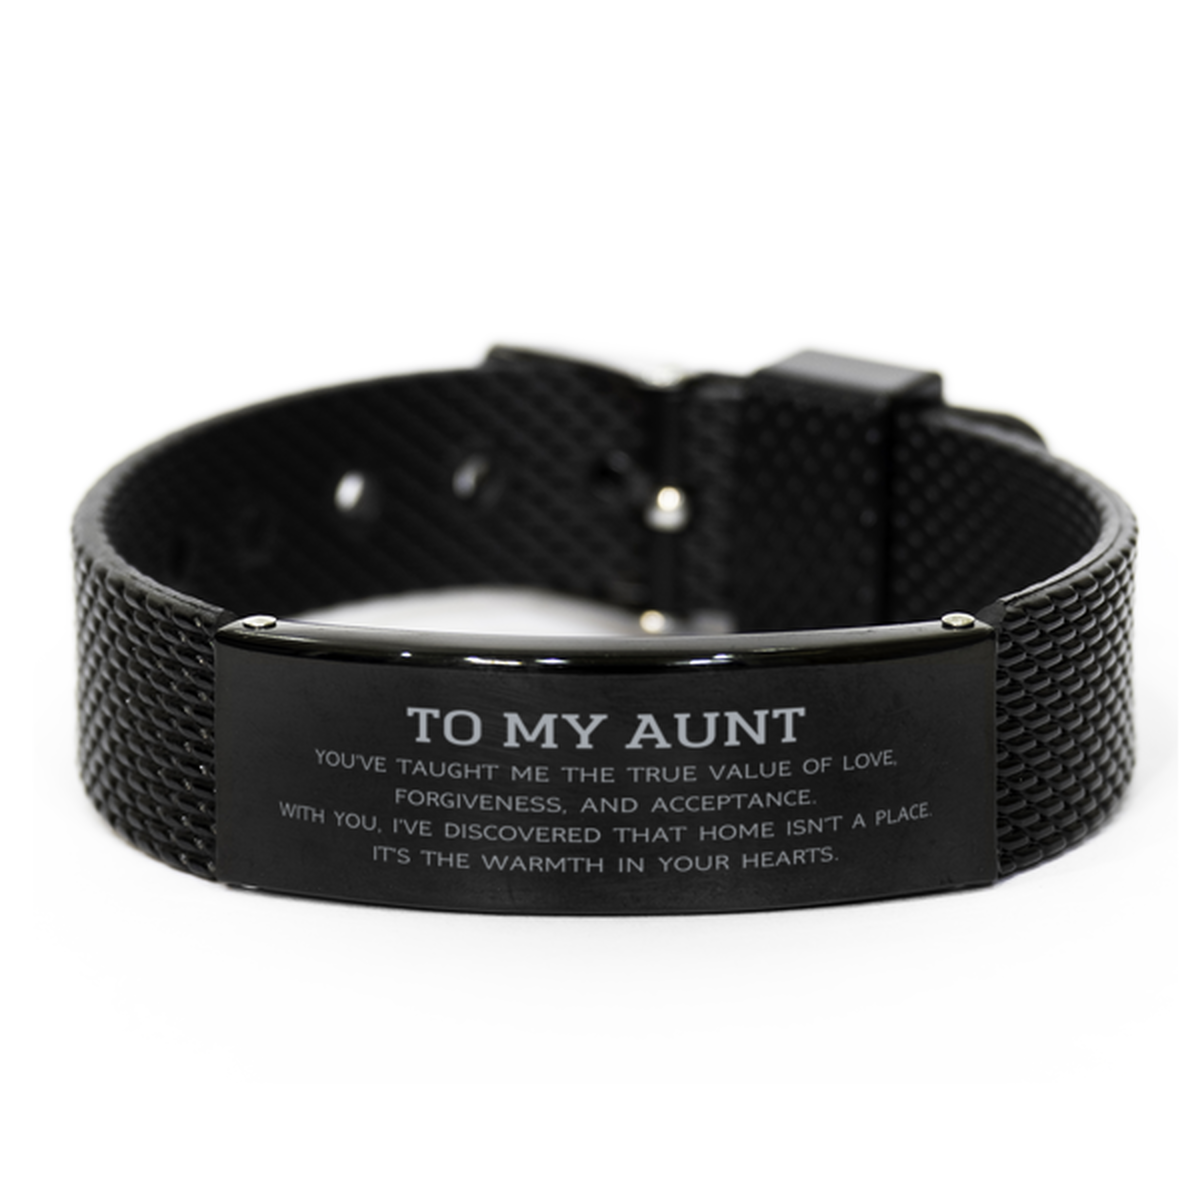 To My Aunt Gifts, You've taught me the true value of love, Thank You Gifts For Aunt, Birthday Black Shark Mesh Bracelet For Aunt